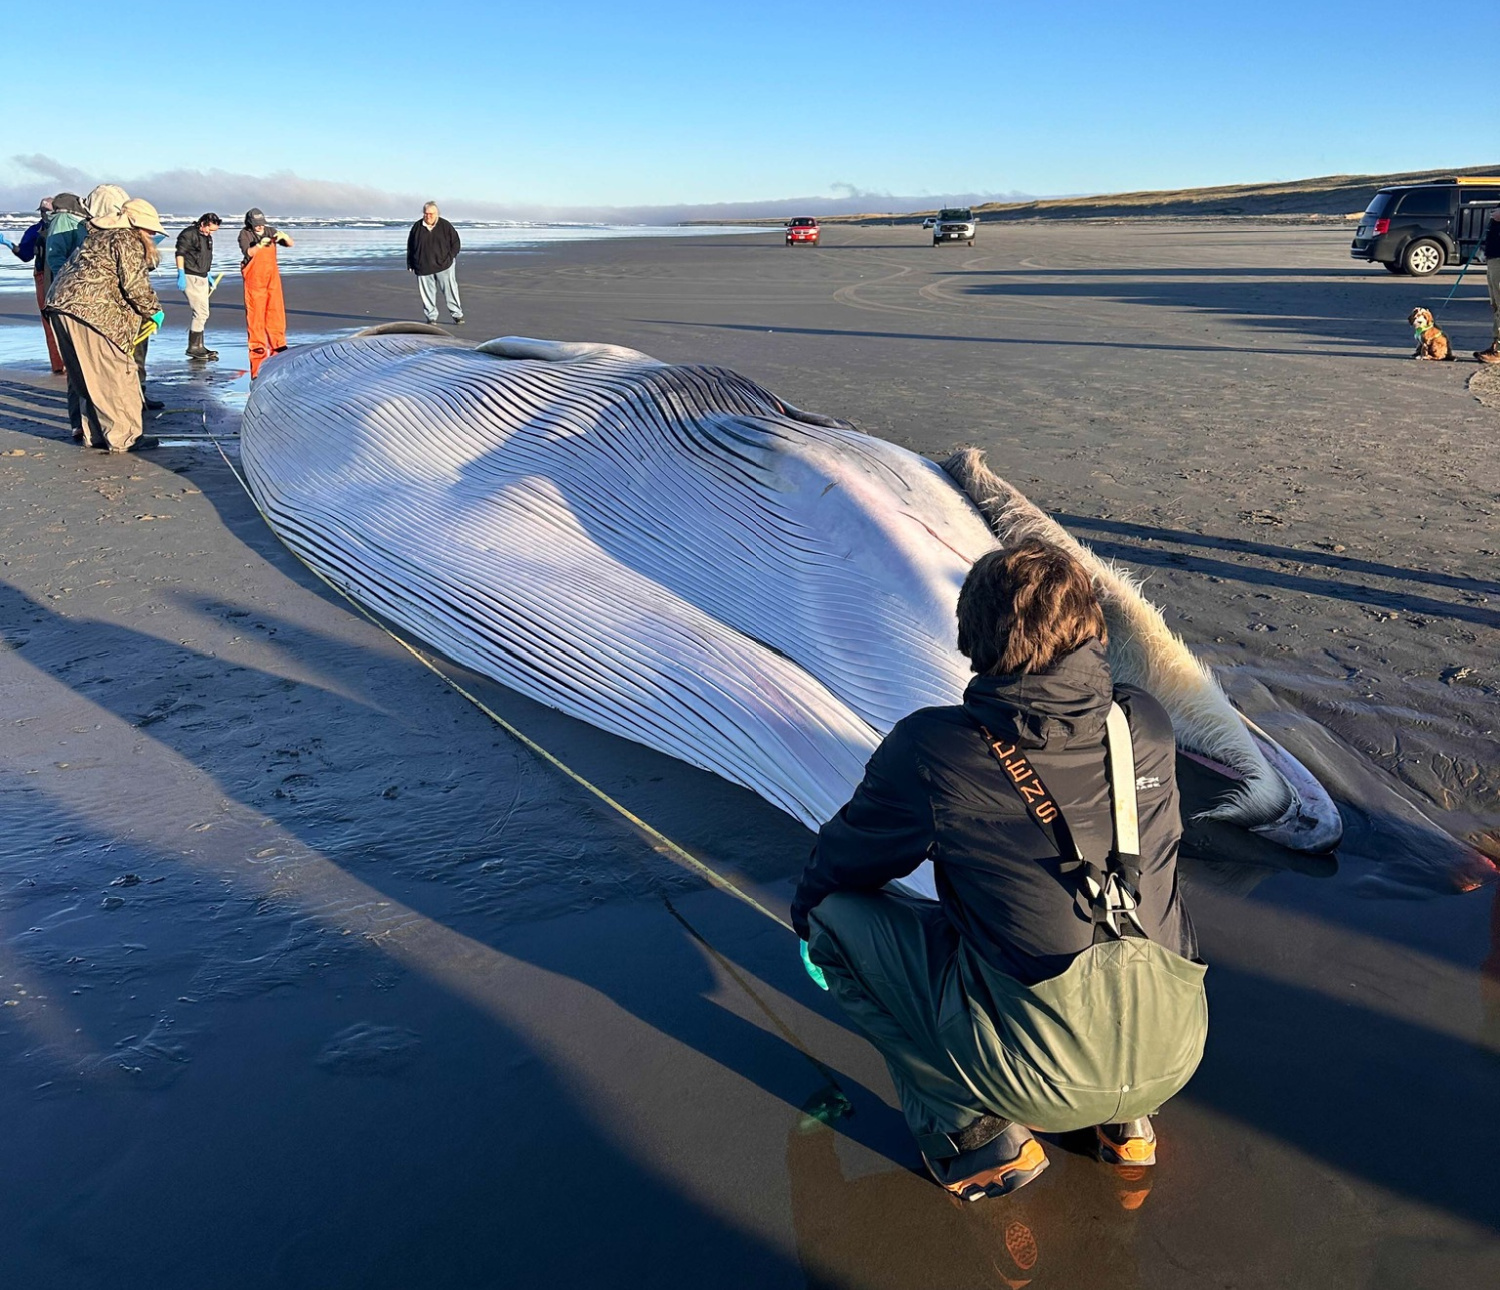 Beachgoers stand by a dead Fin whale in Oregon.